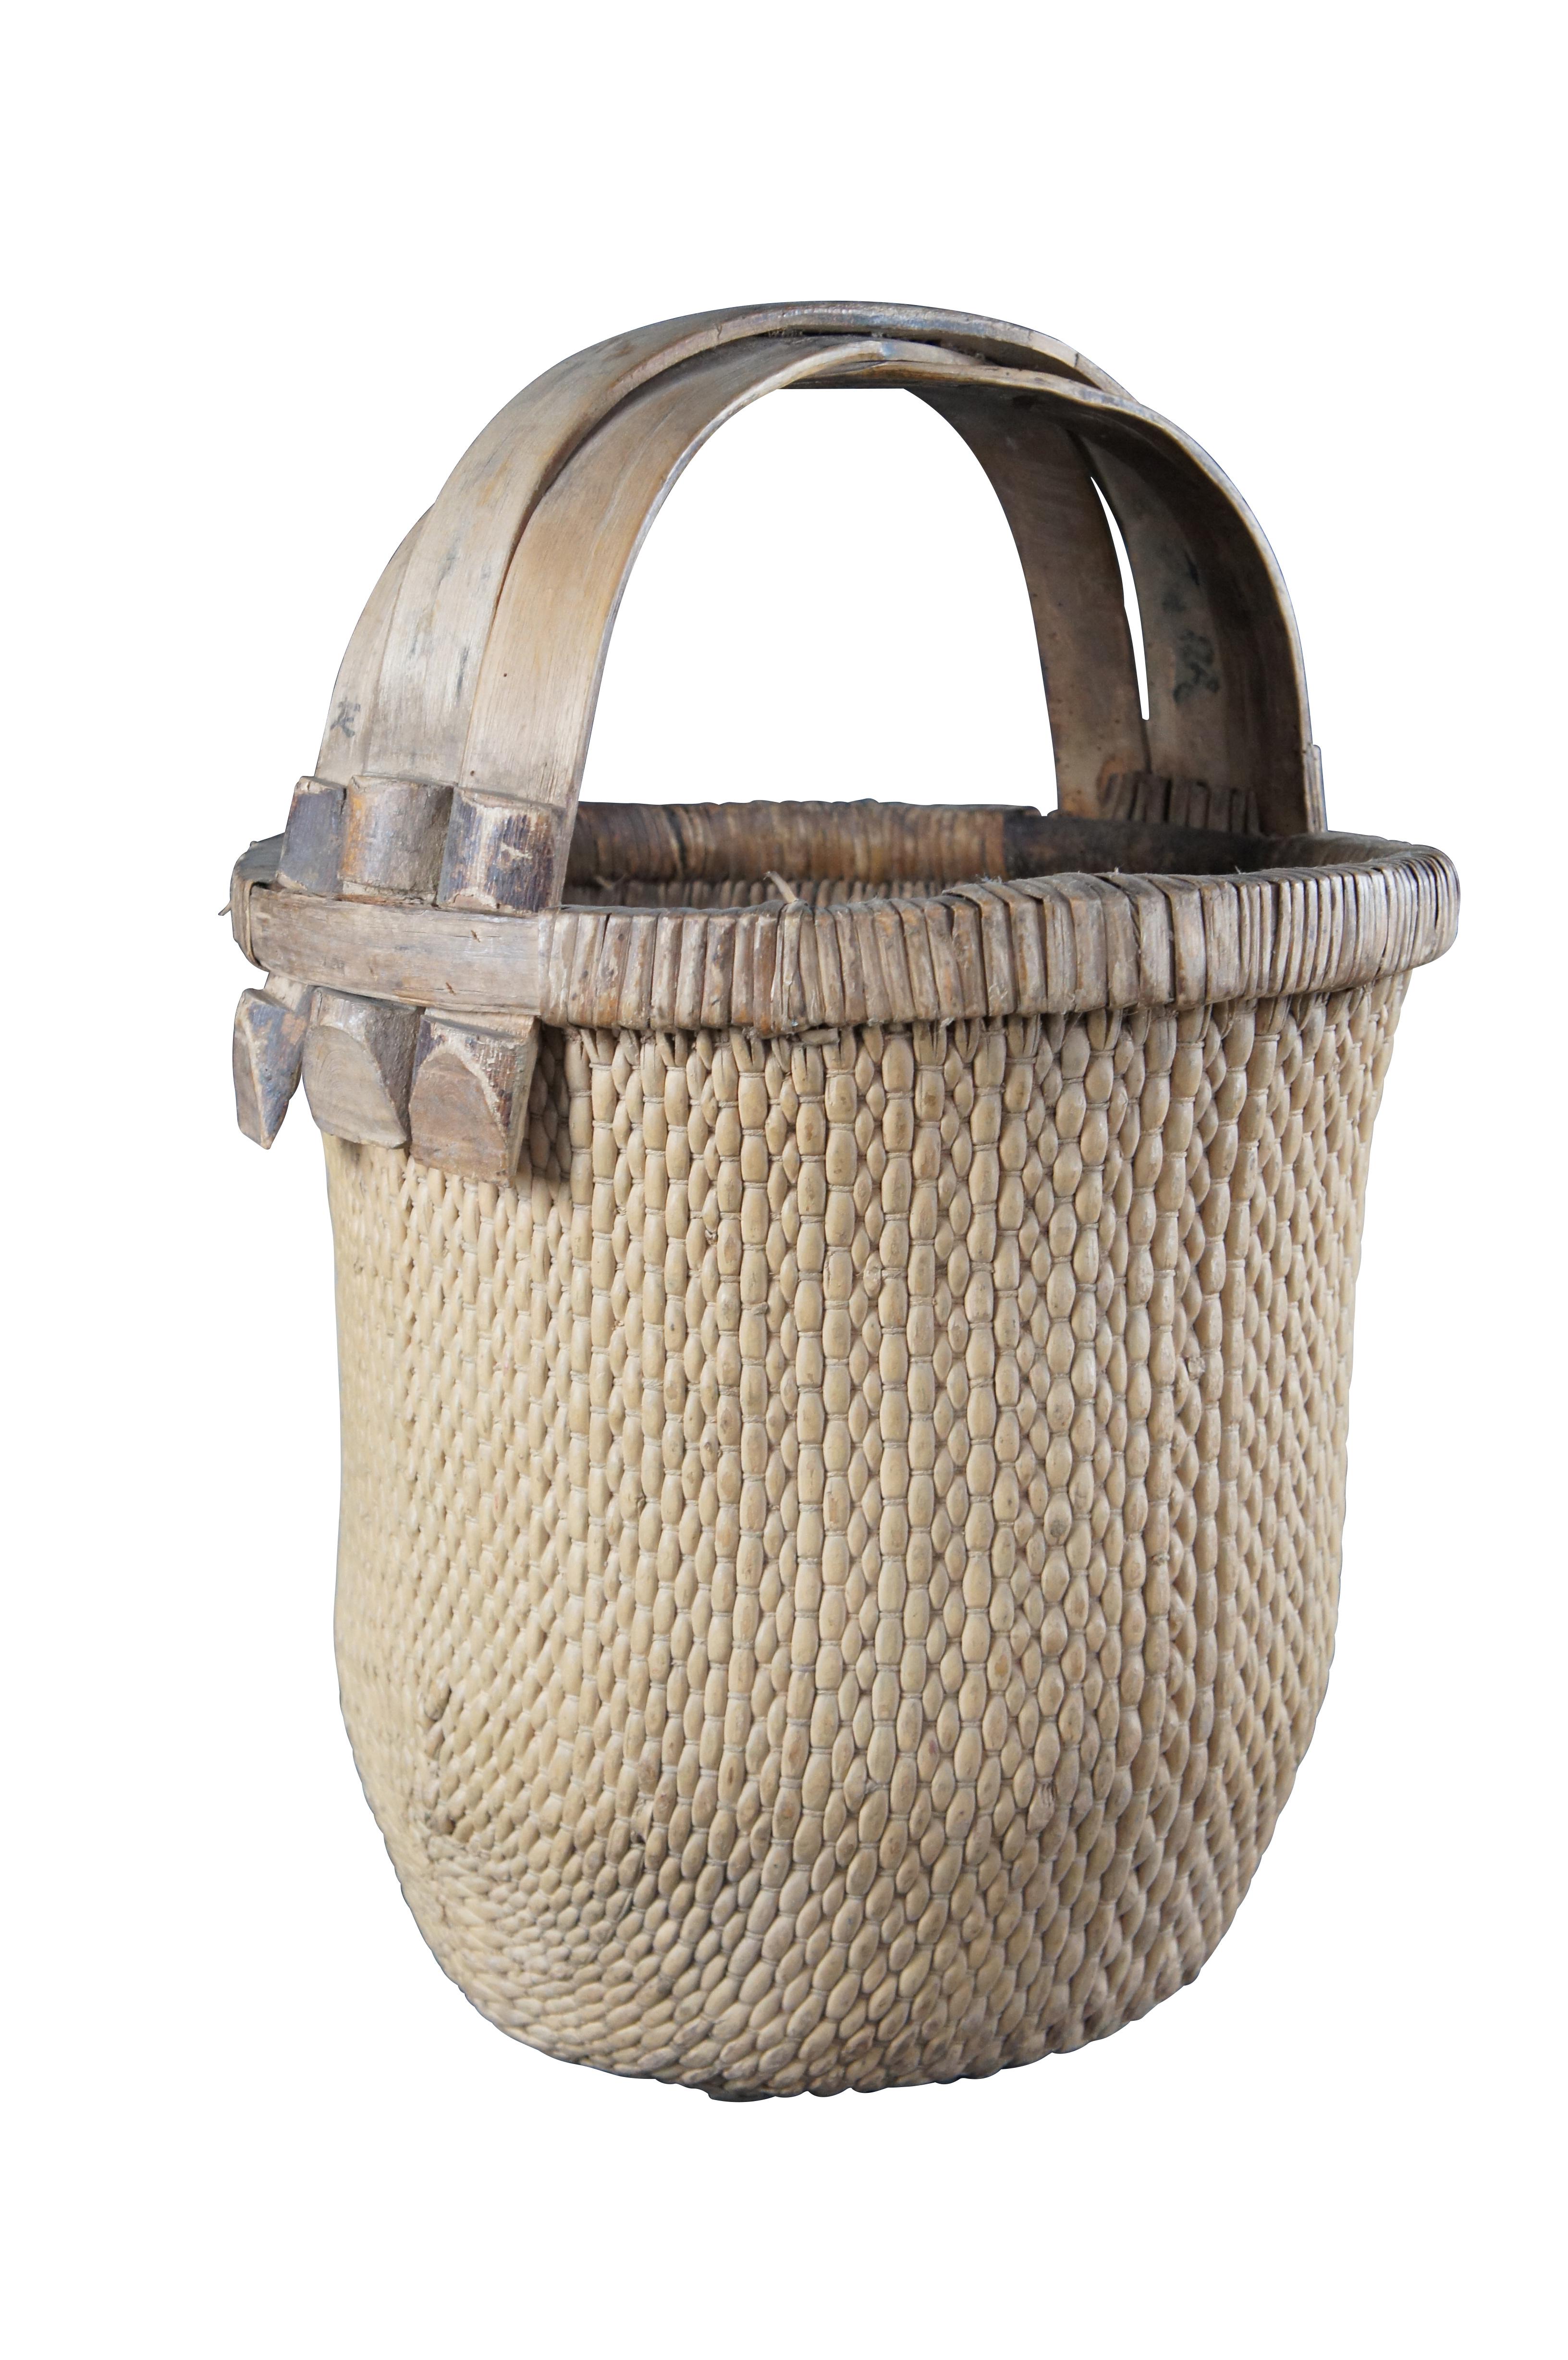 Early 20th Century Chinese Rice Basket. Made from woven reed with a bentwood handle and calligraphy.

Dimensions:
17